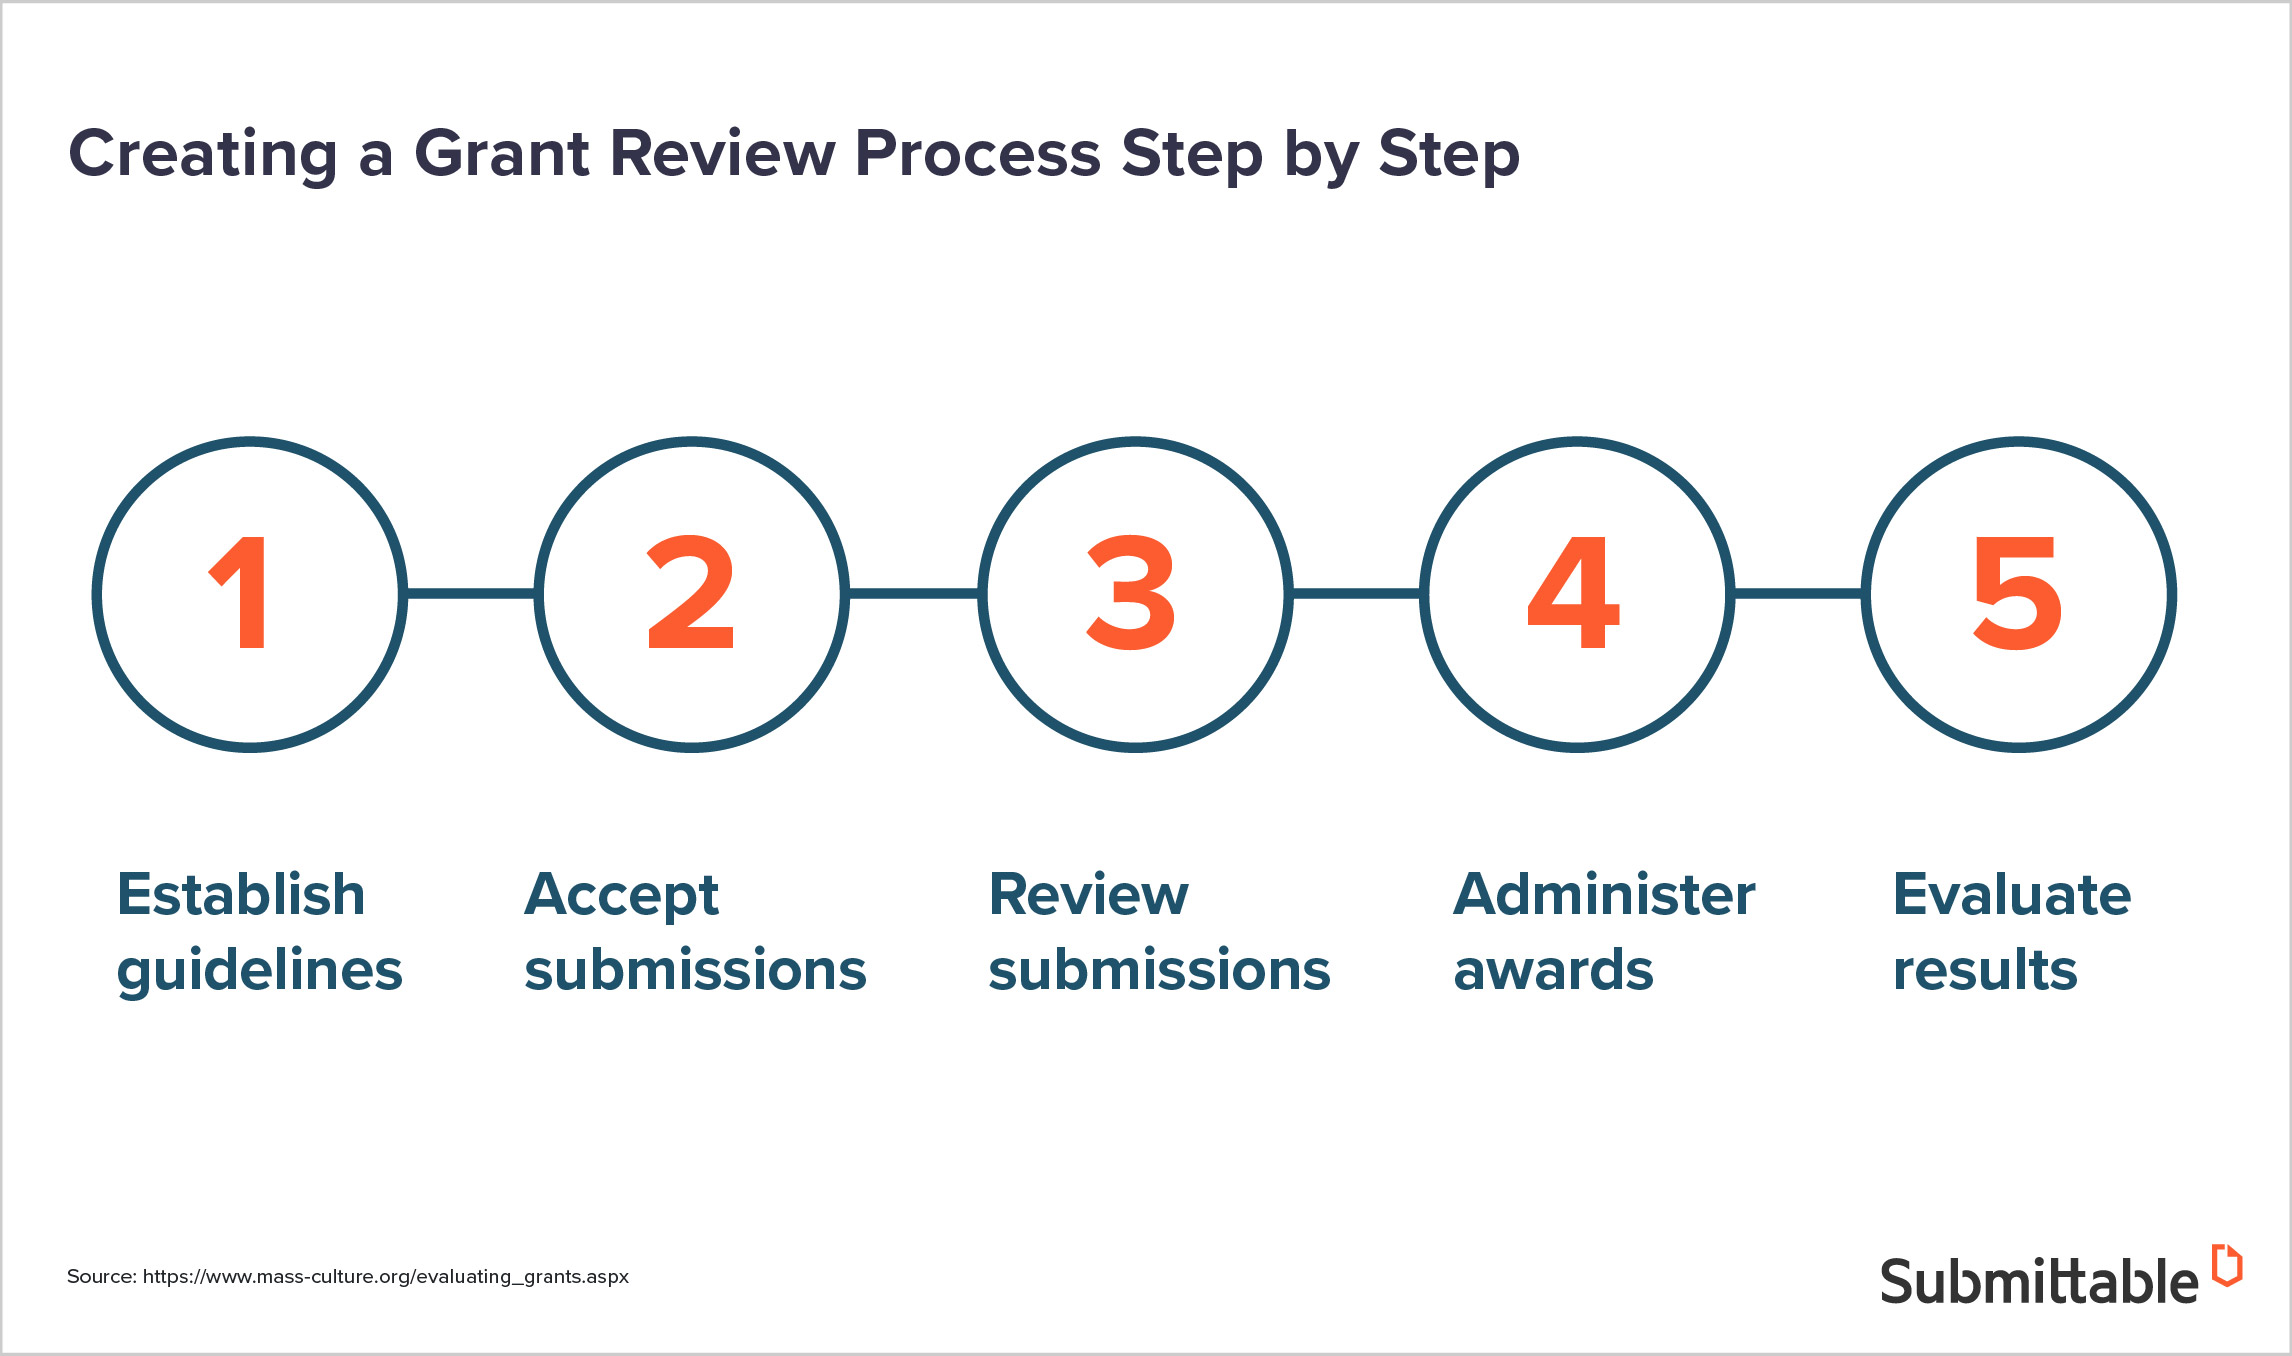 Designing a grant review process that delivers quality results